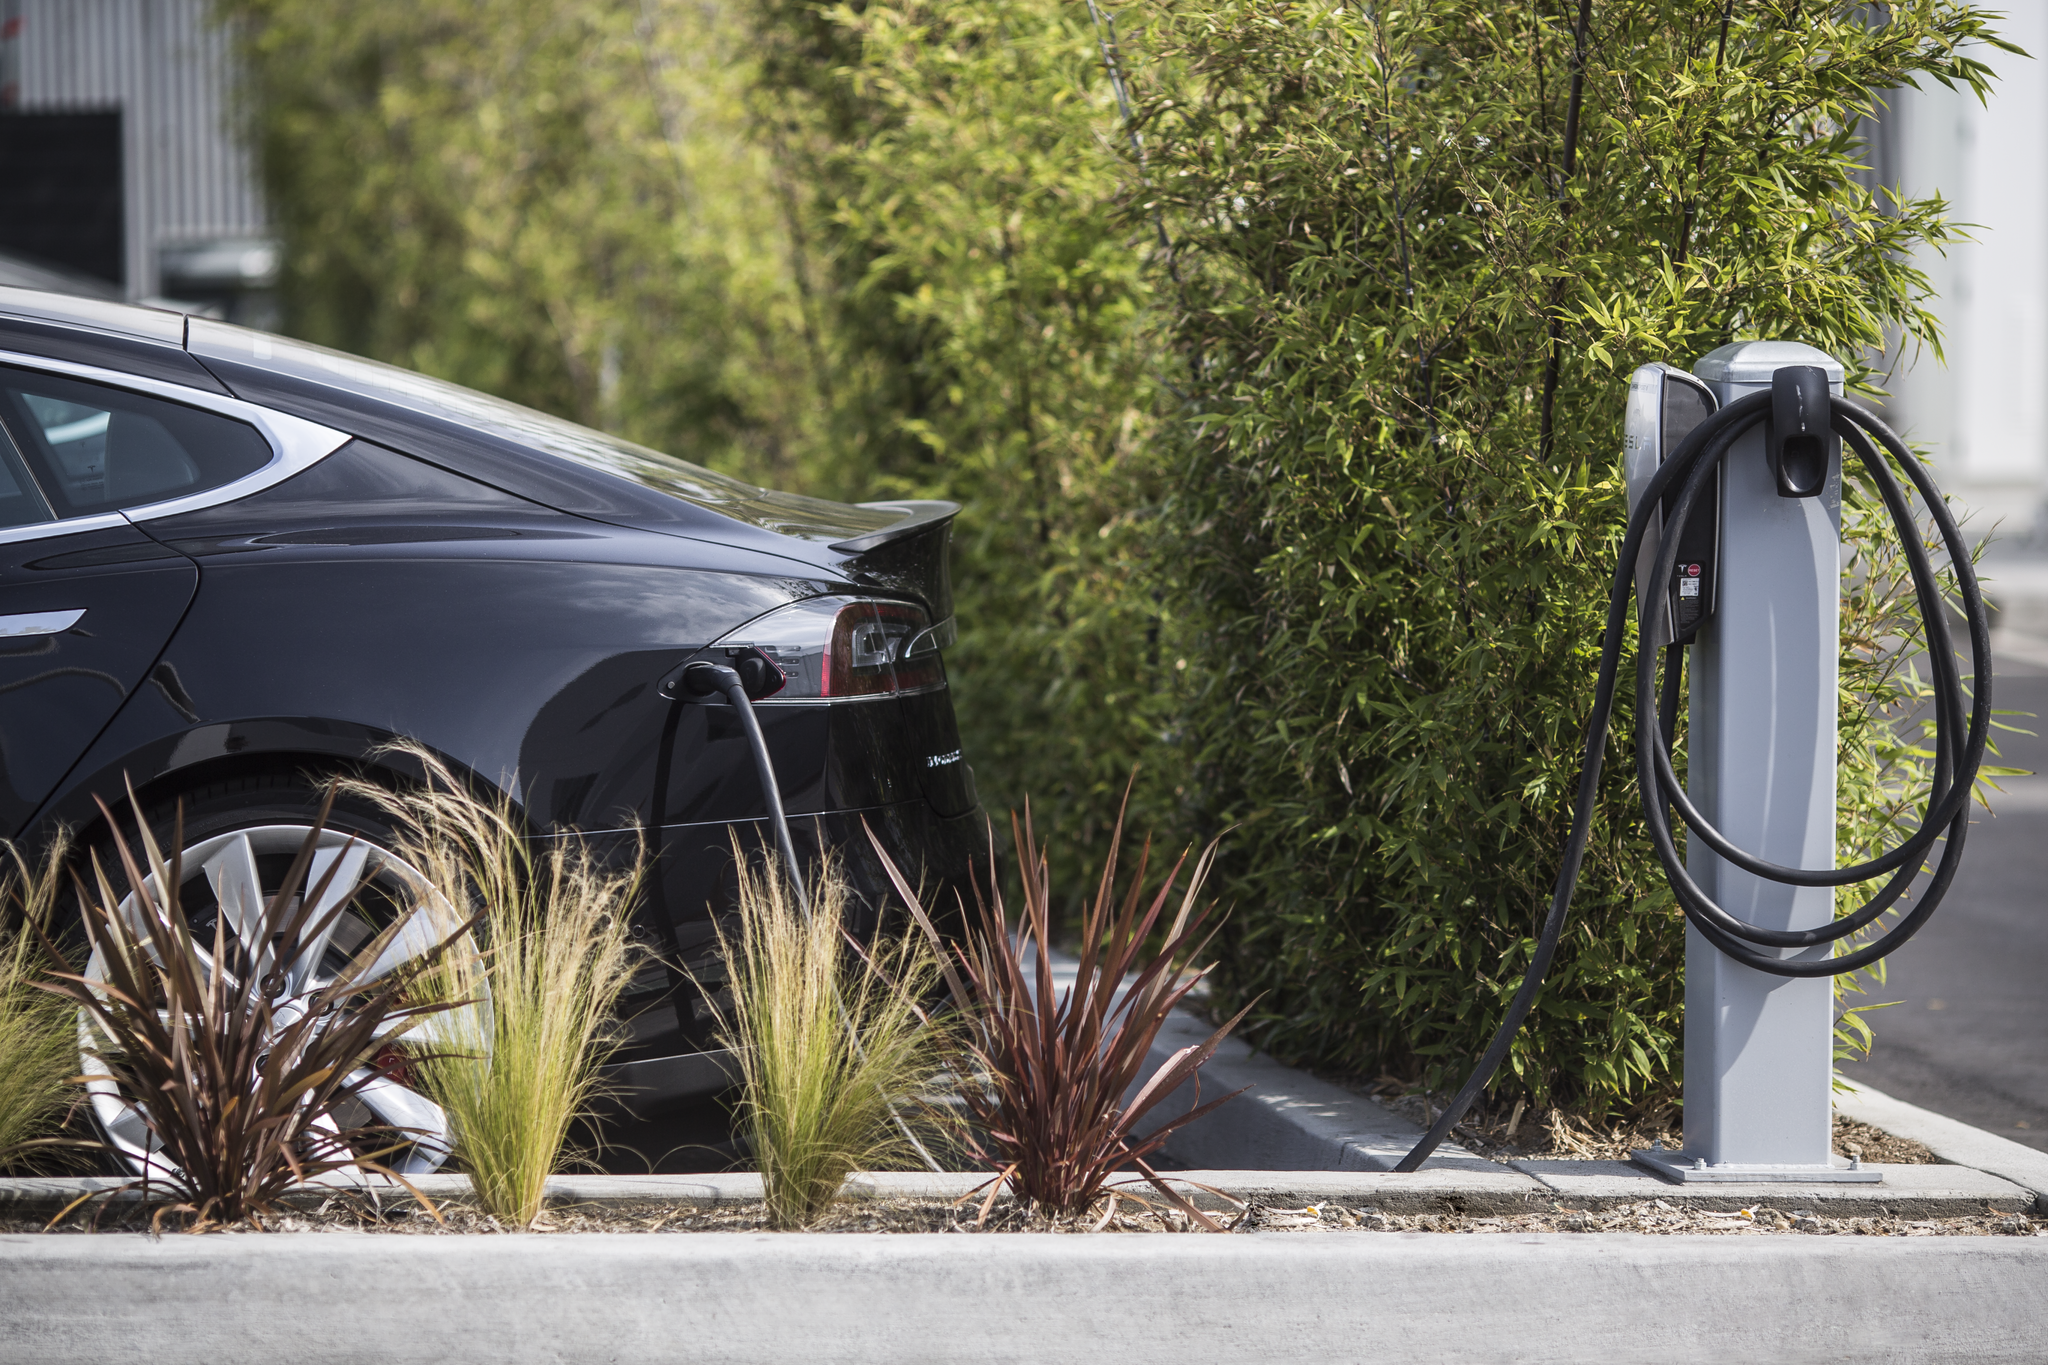 Hit the Road with Ease: Discover Hotel Chains Providing Destination Charging for EVs